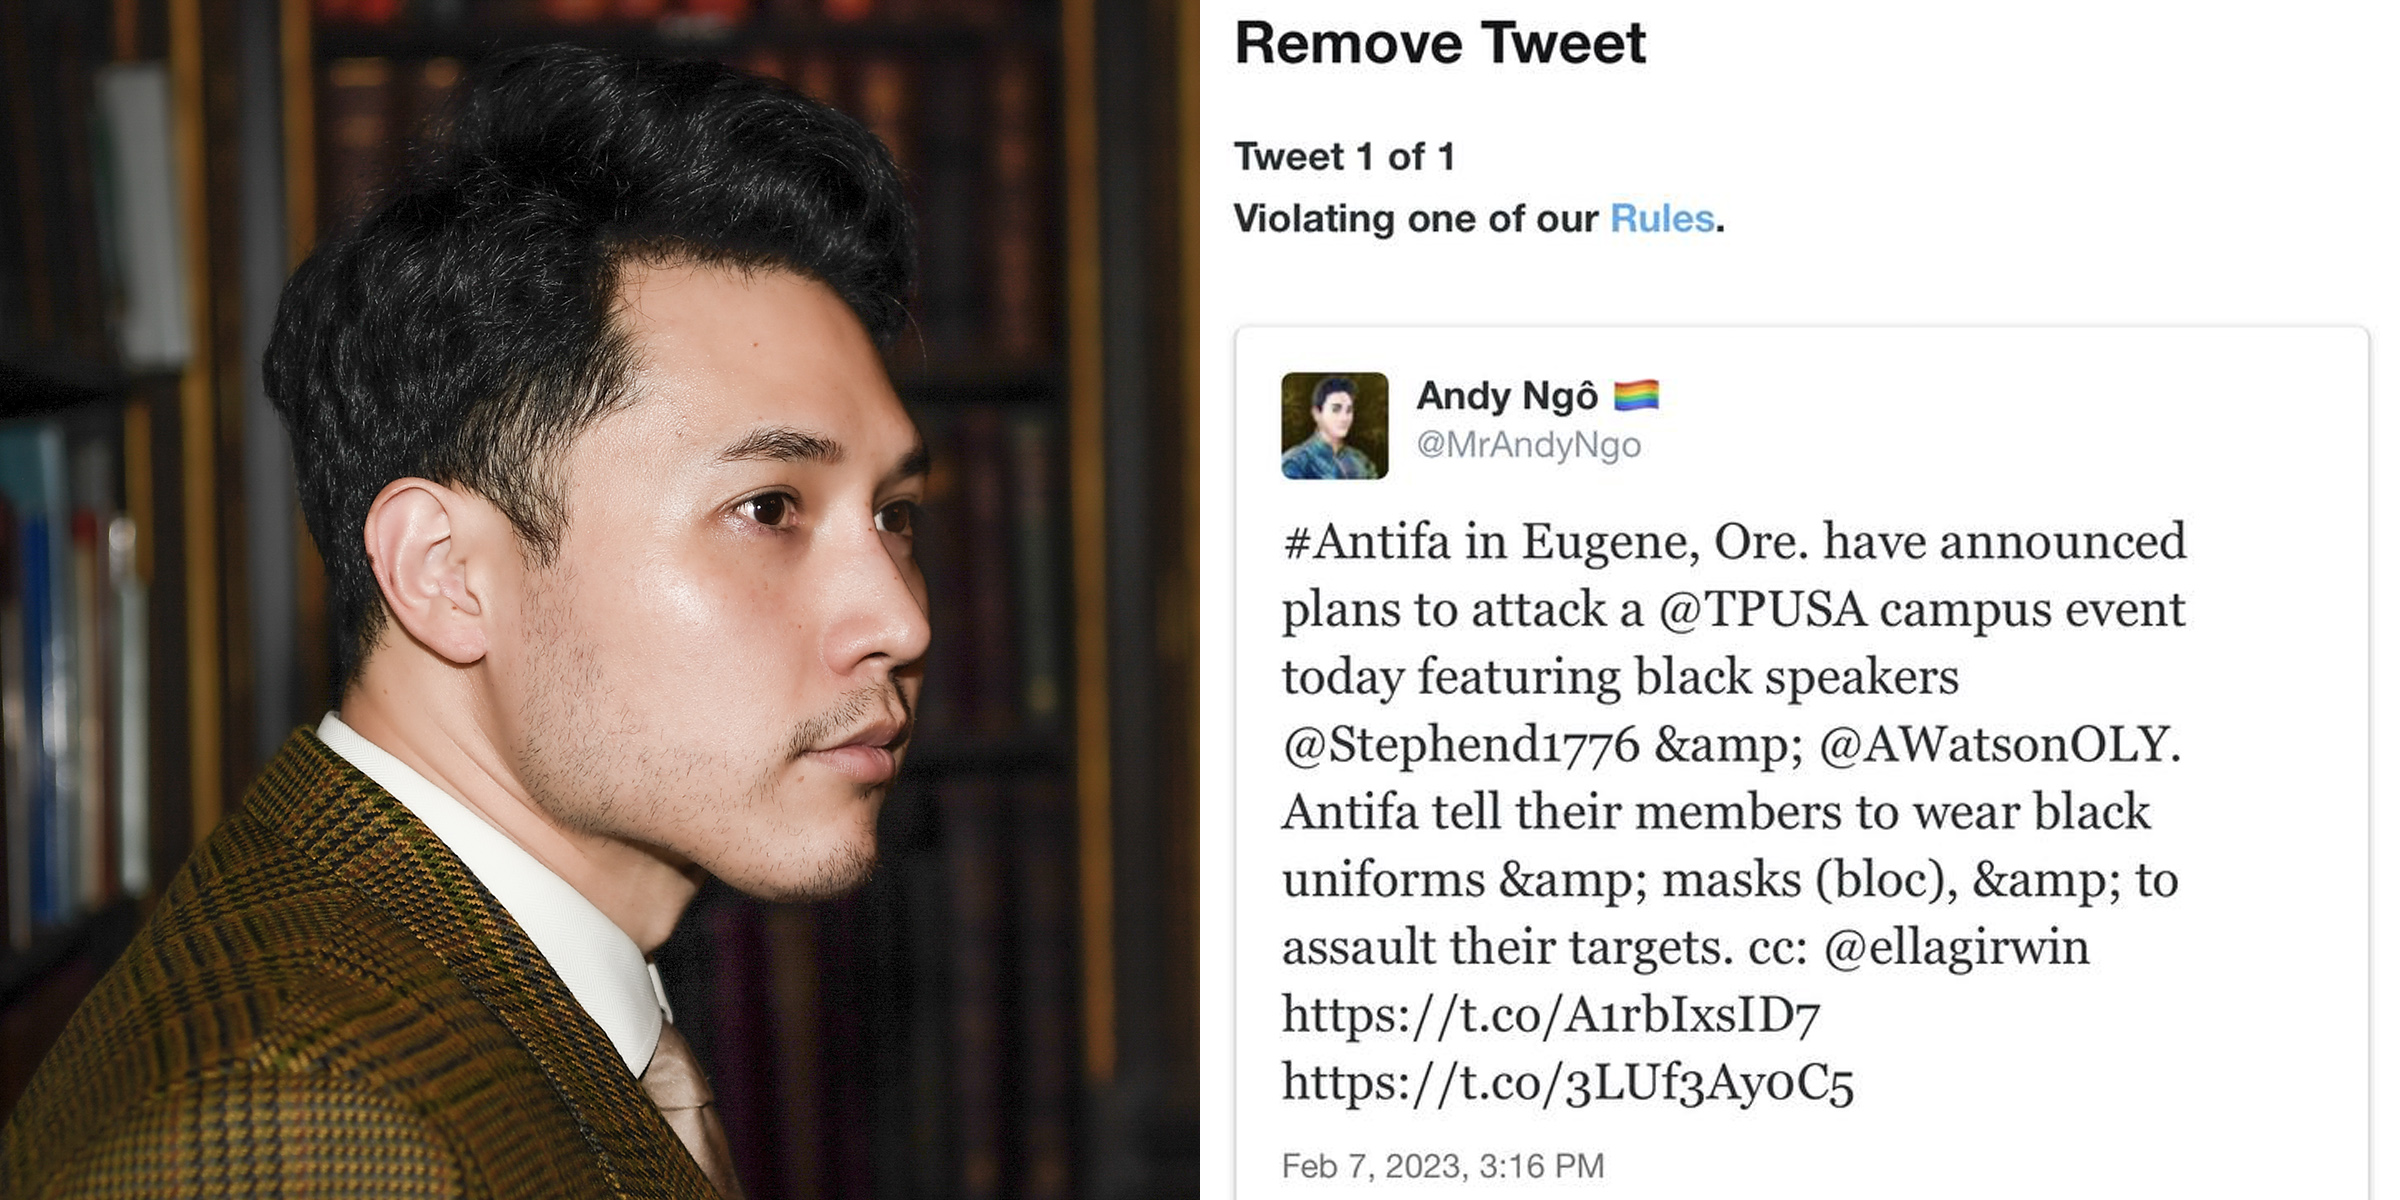 BREAKING: Andy Ngo locked out of Twitter after reporting on Antifa plan to attack TPUSA Oregon event